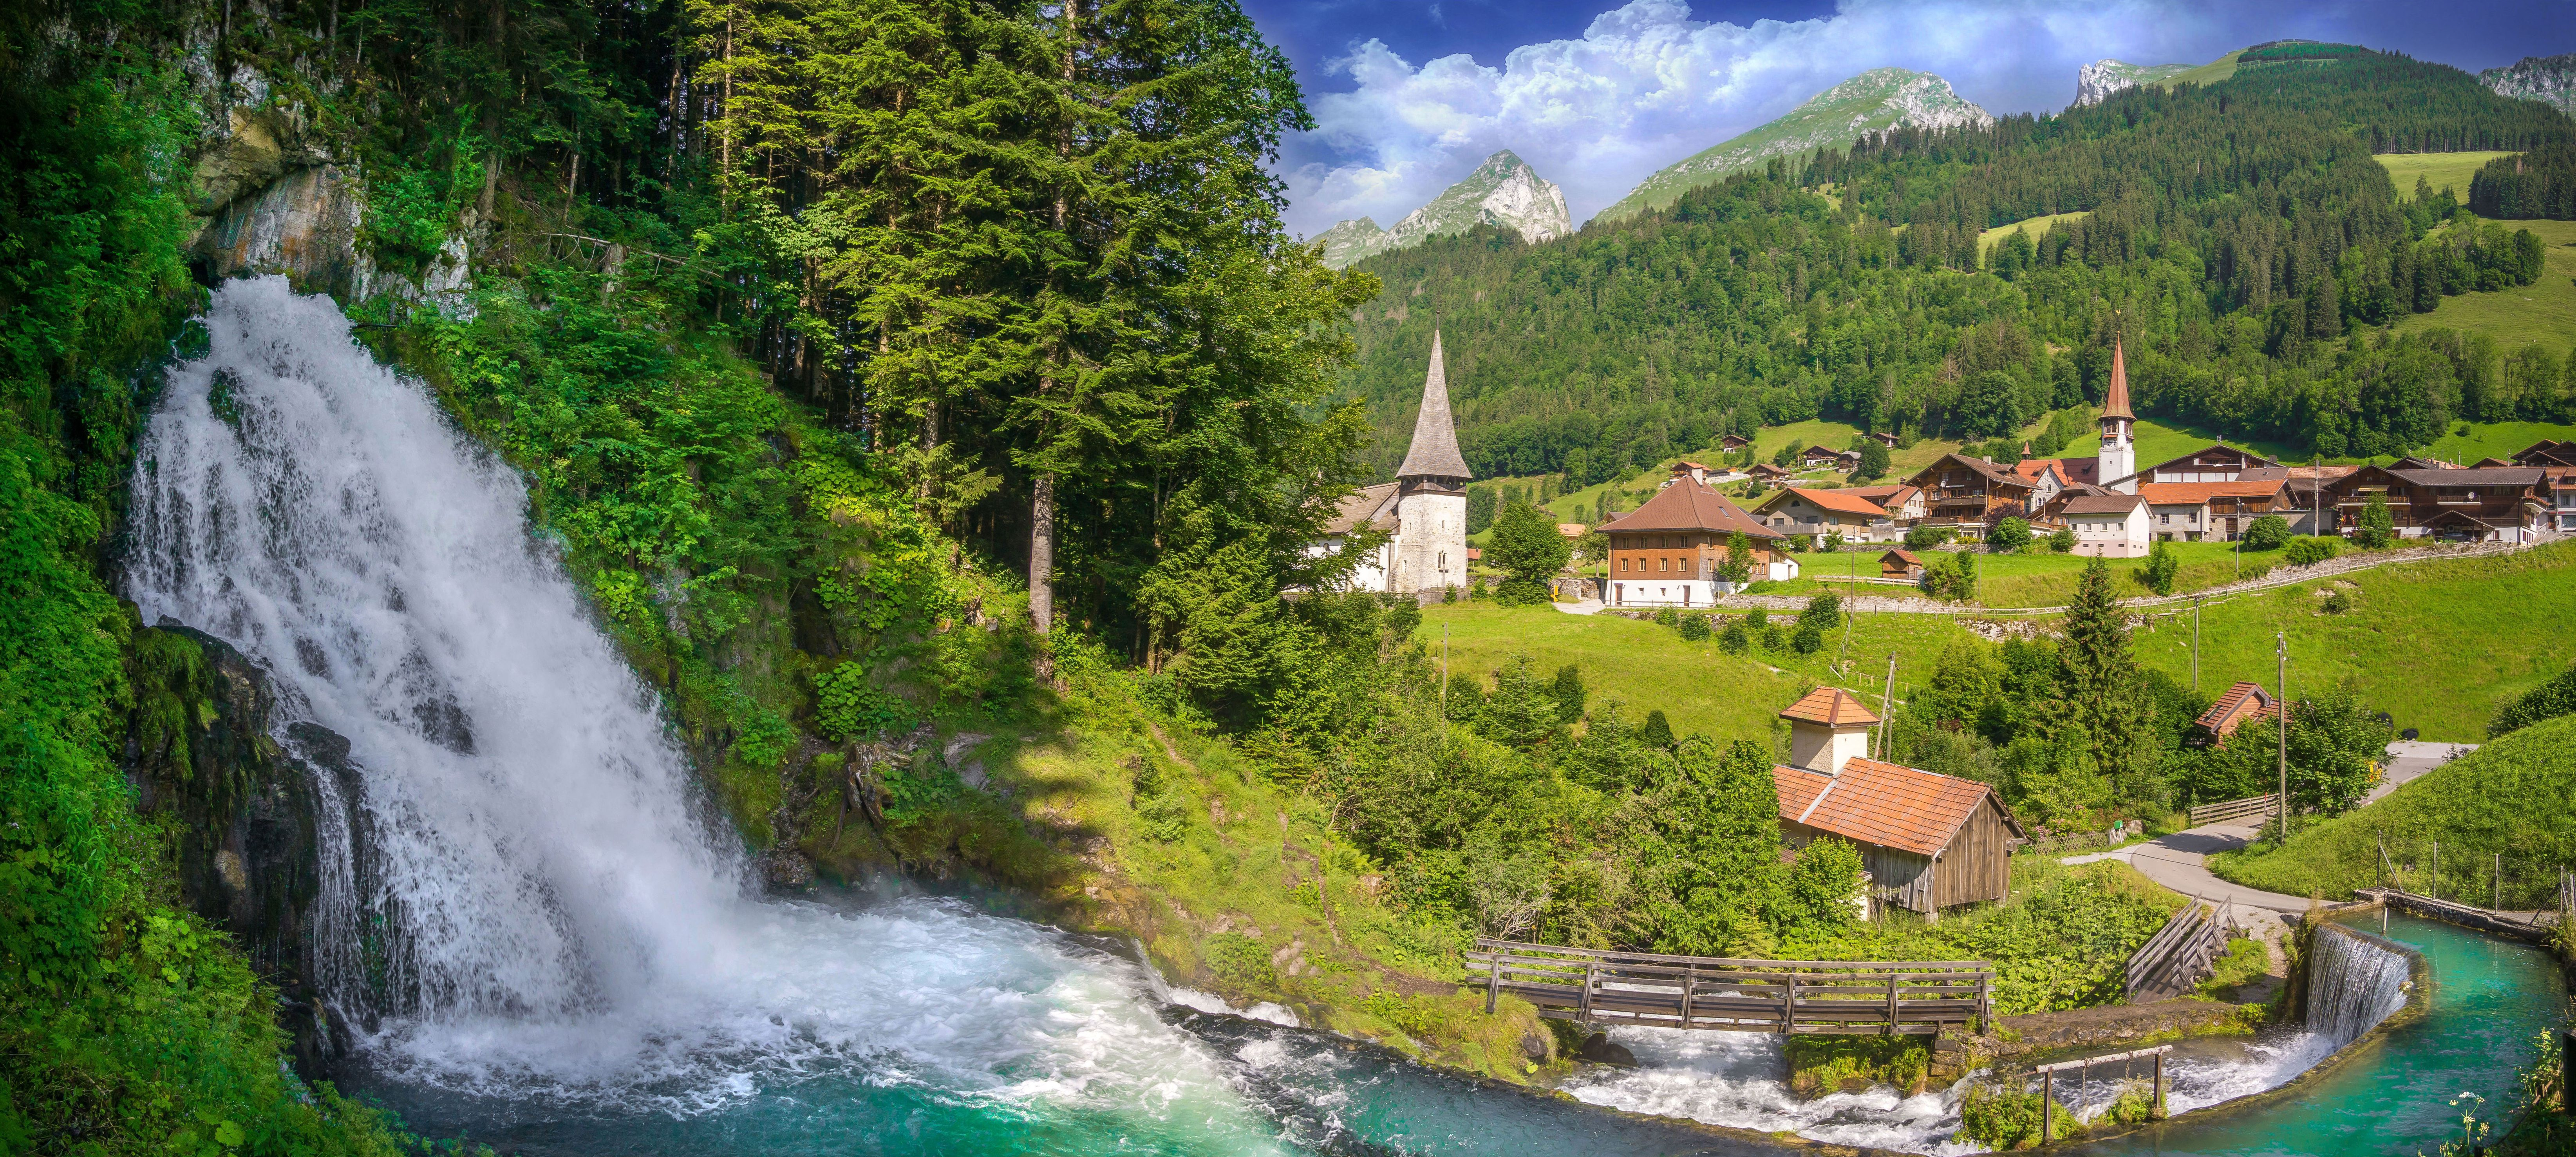 Free photo A village in Switzerland next to a waterfall